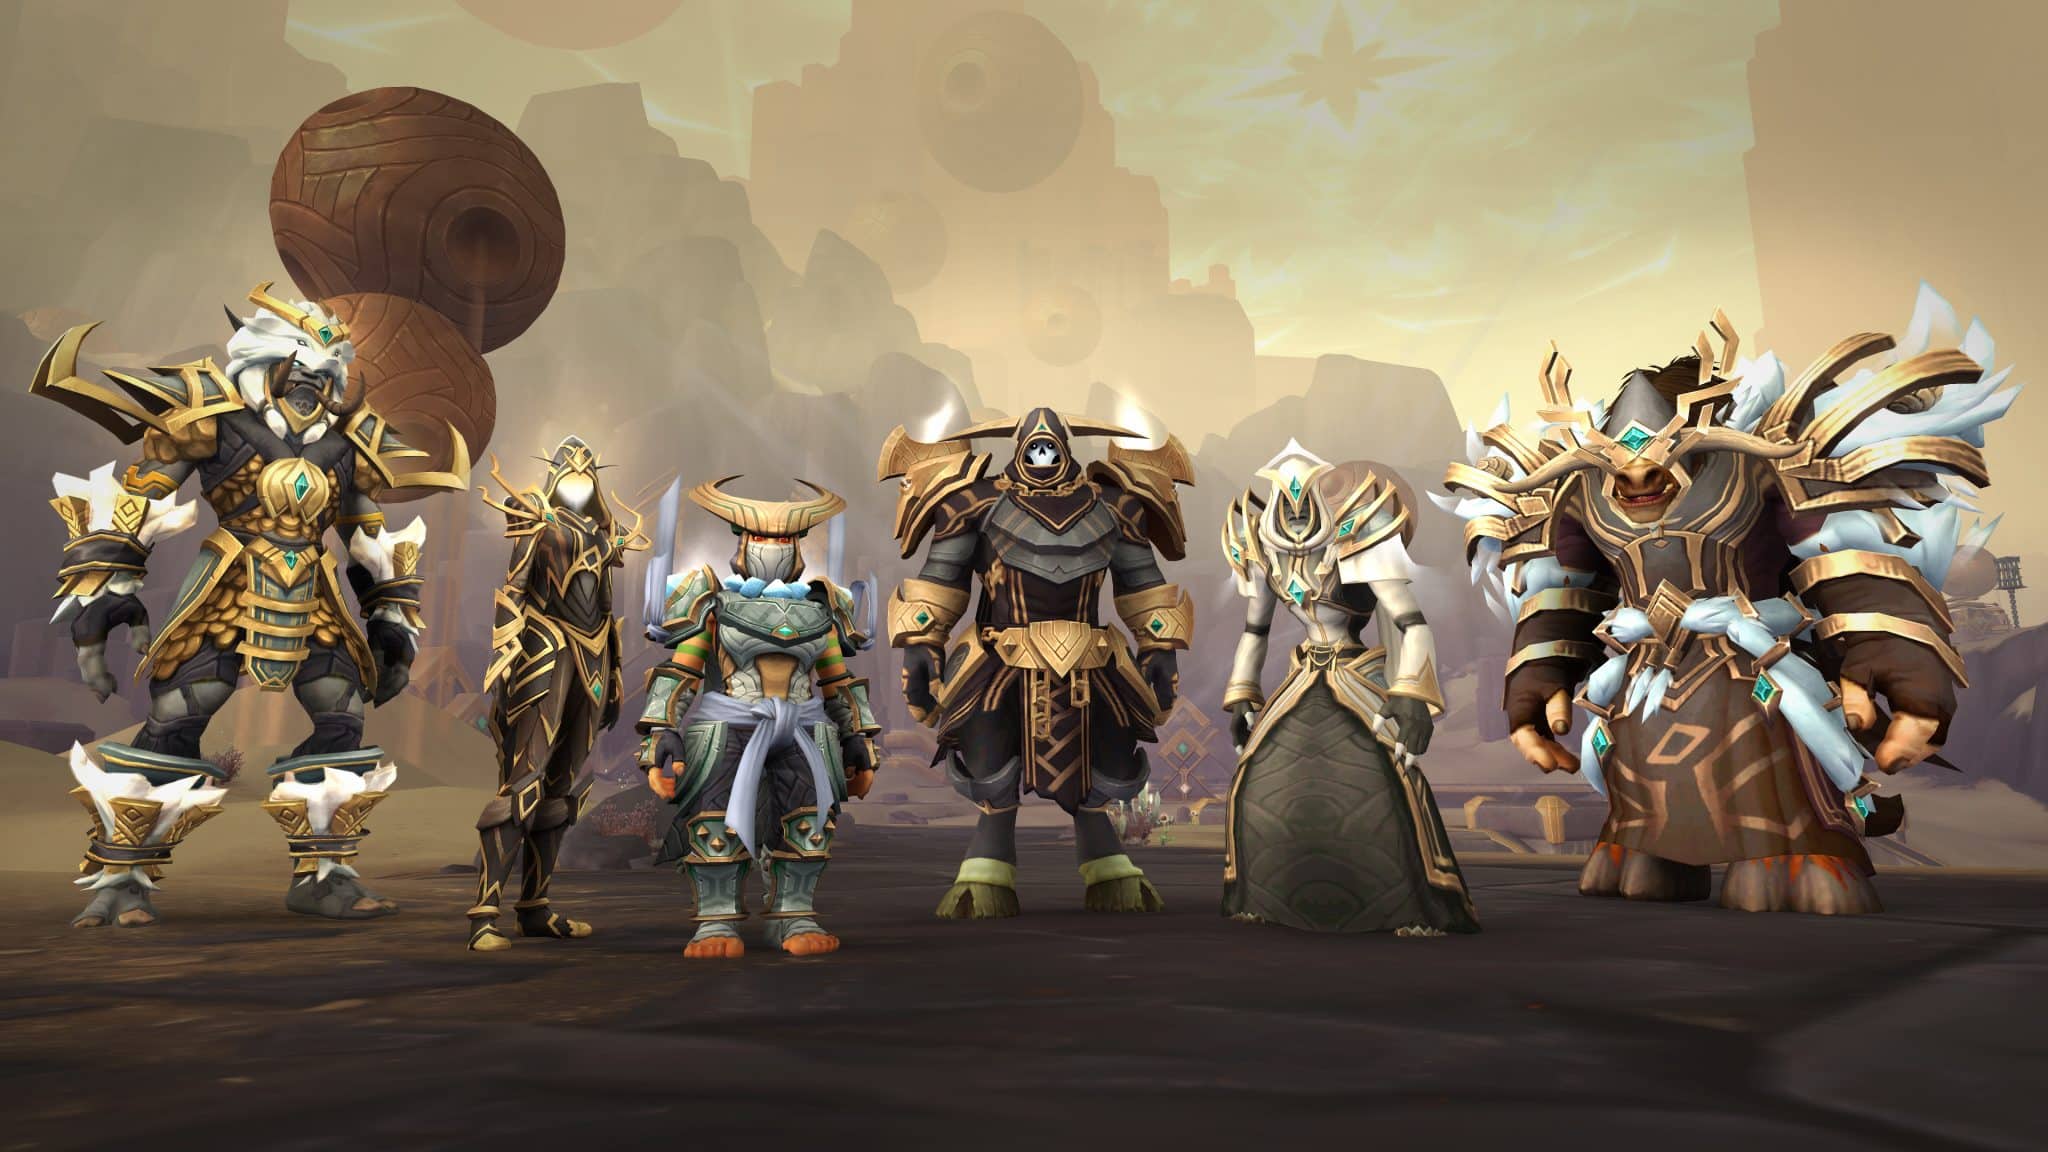 world of warcraft wow shadowlands eternity's end patch 9.2 class sets